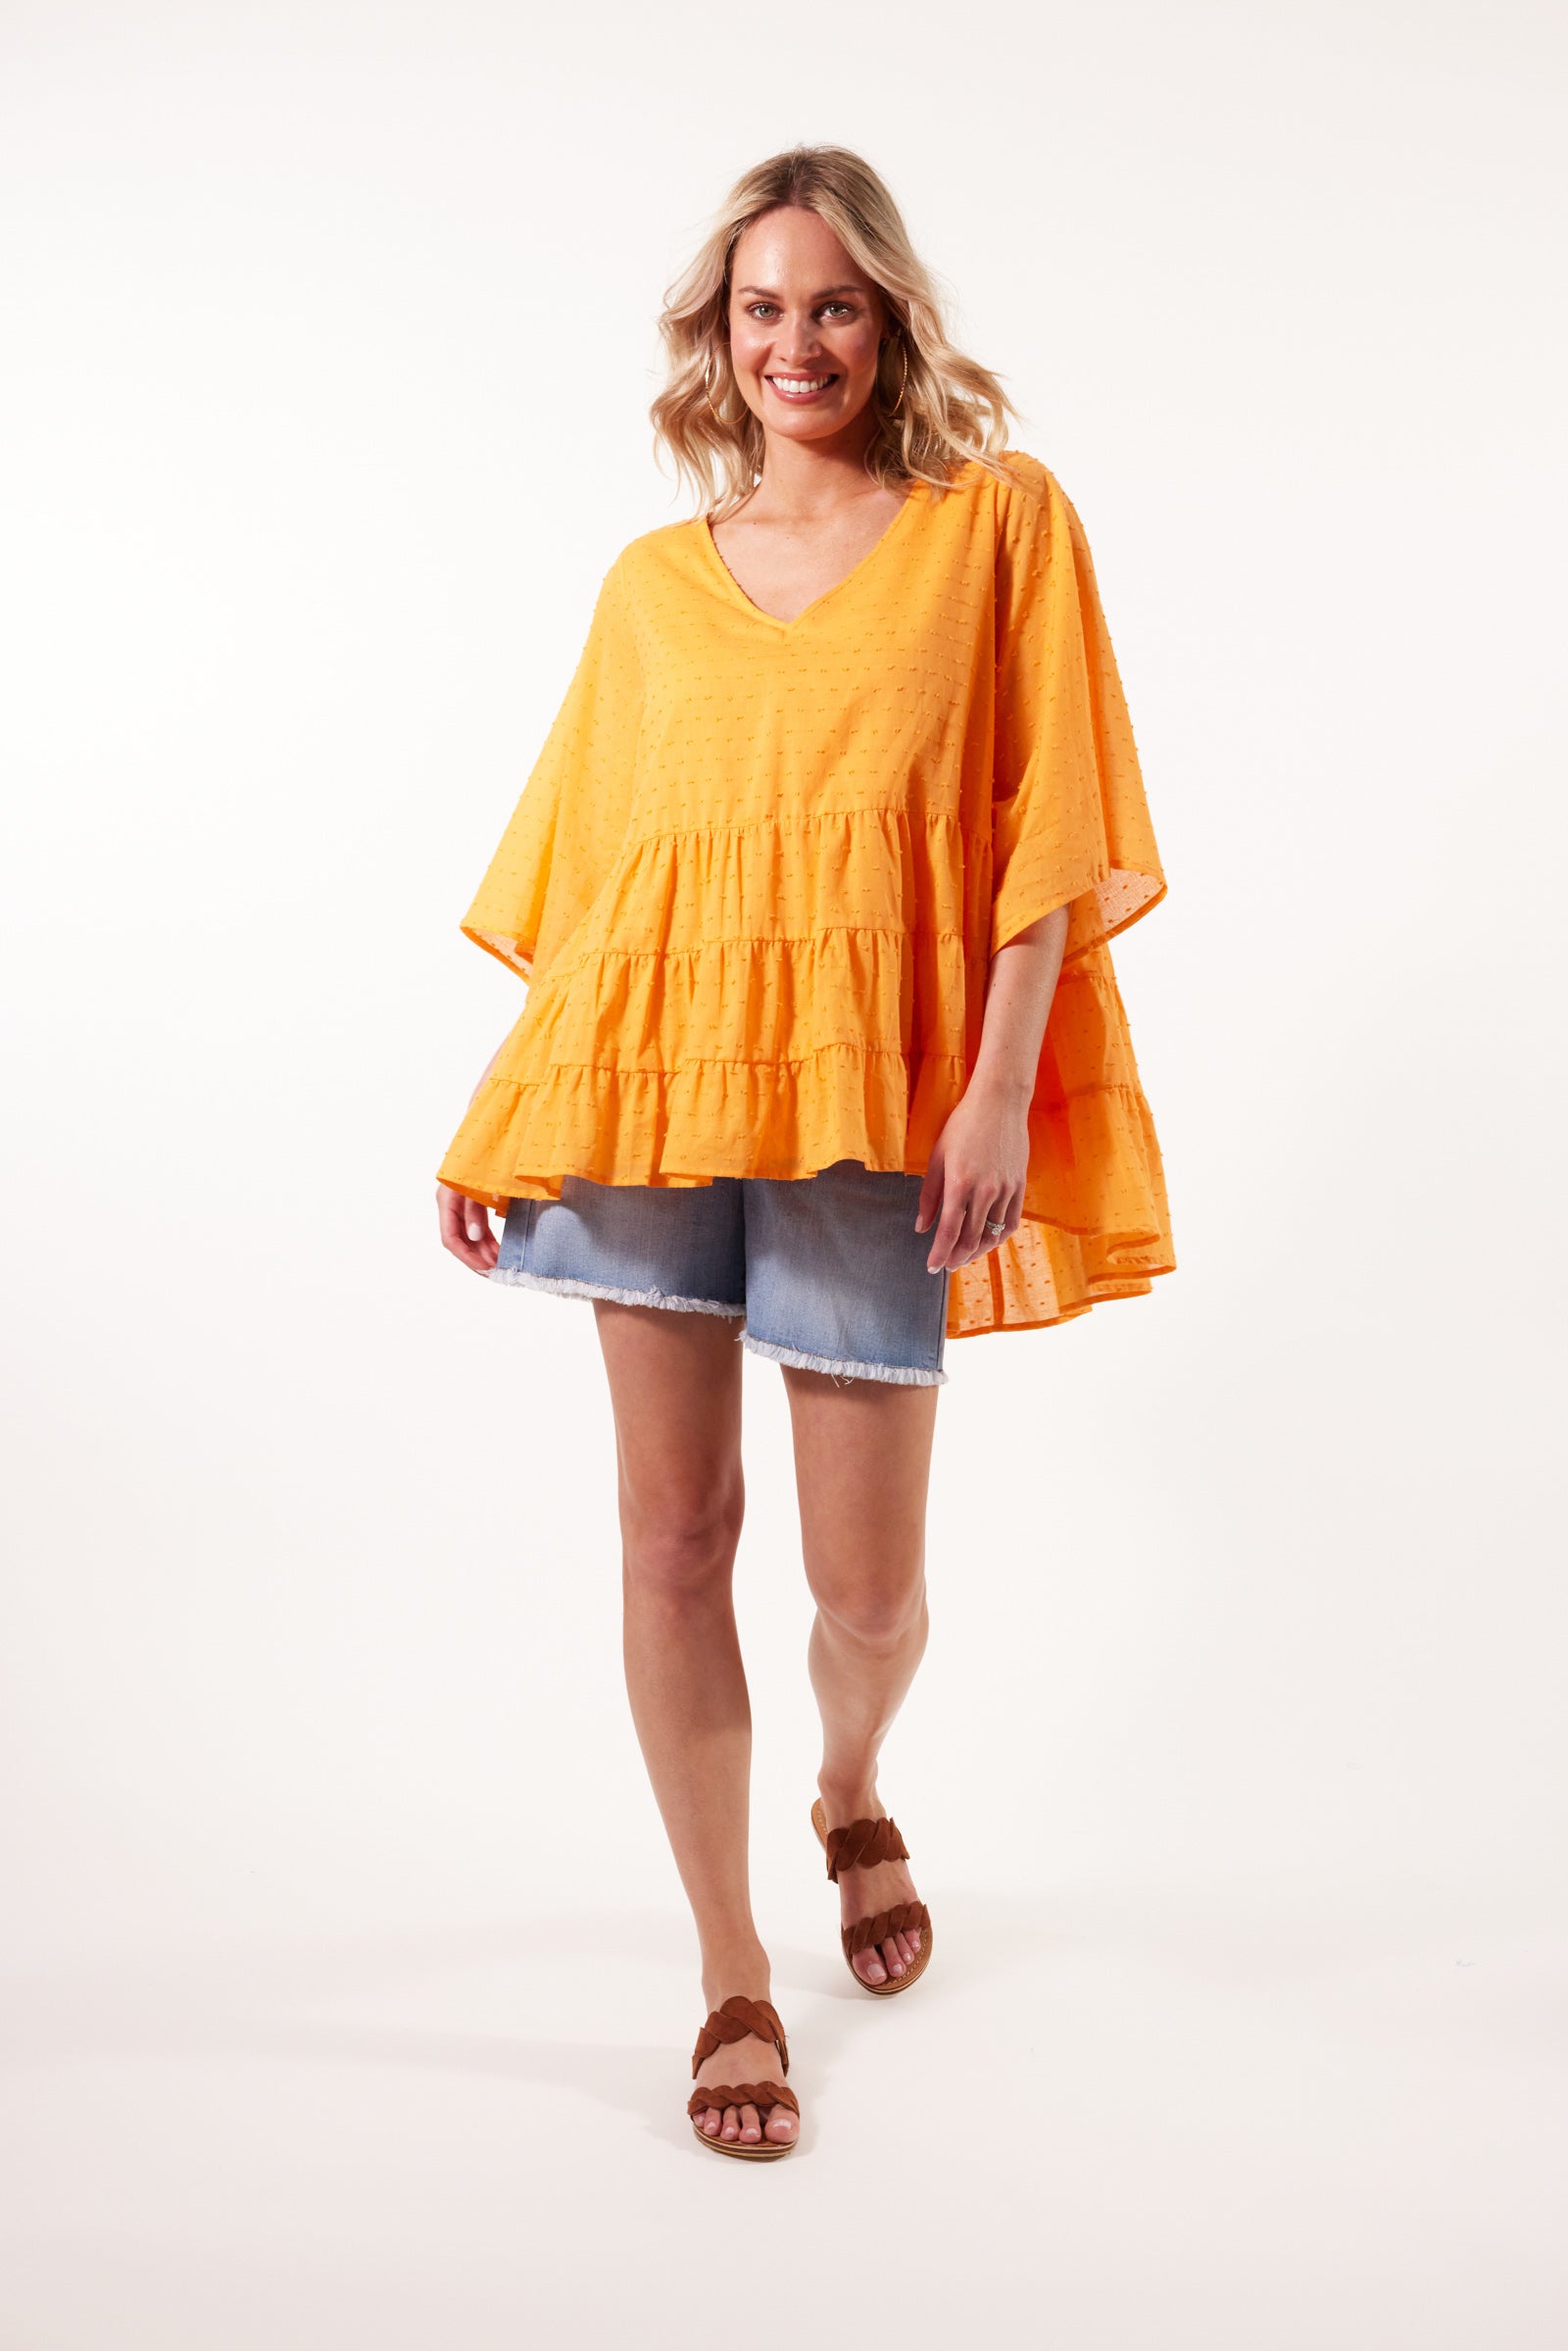 Soiree Relax Top - Tangelo - Isle of Mine Clothing - Top 3/4 Sleeve One Size